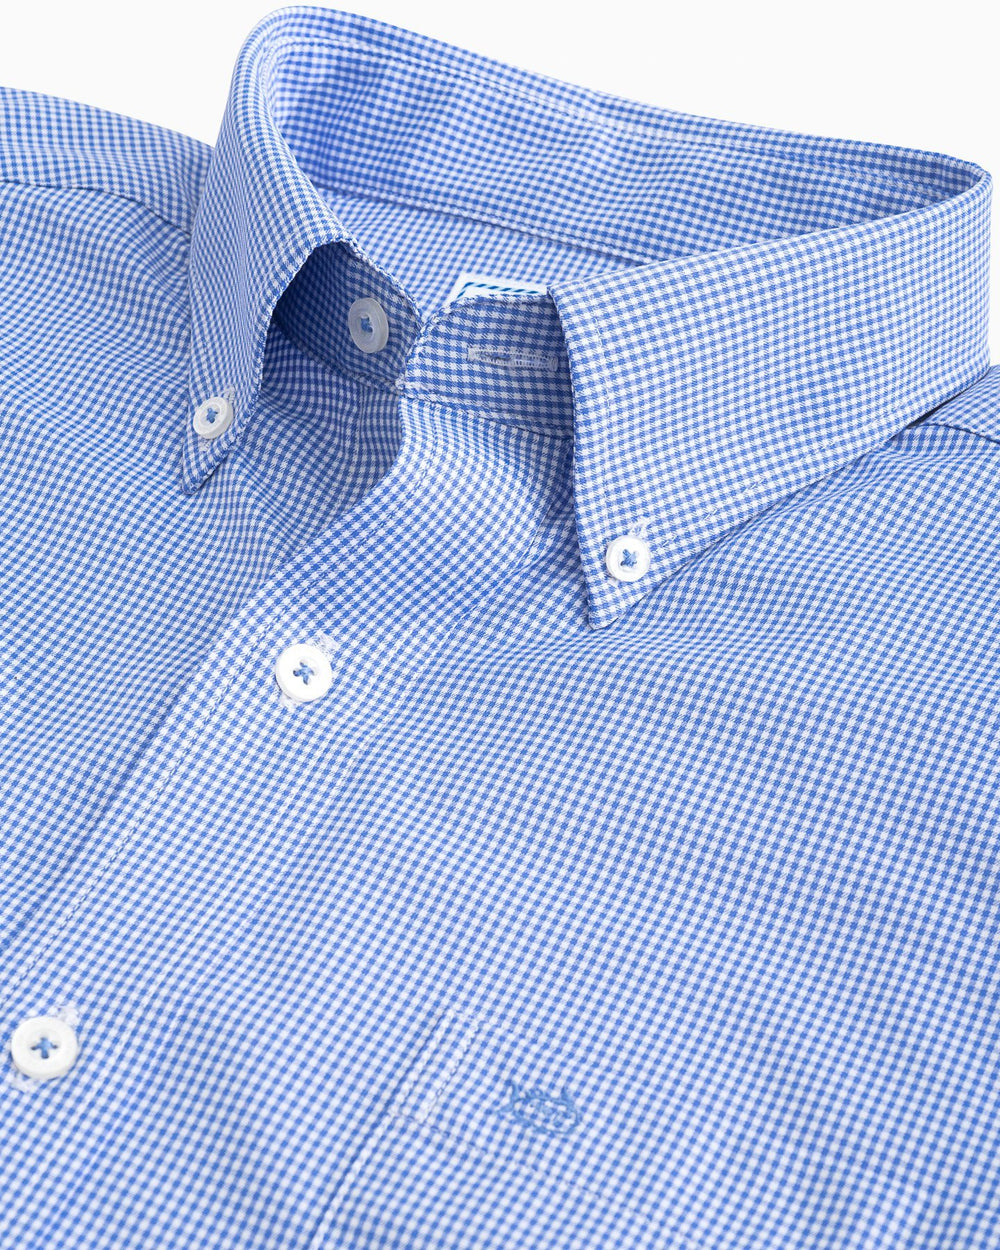 The collar of the Men's Navy Micro Gingham Intercoastal Performance Sport Shirt by Southern Tide - blue cove